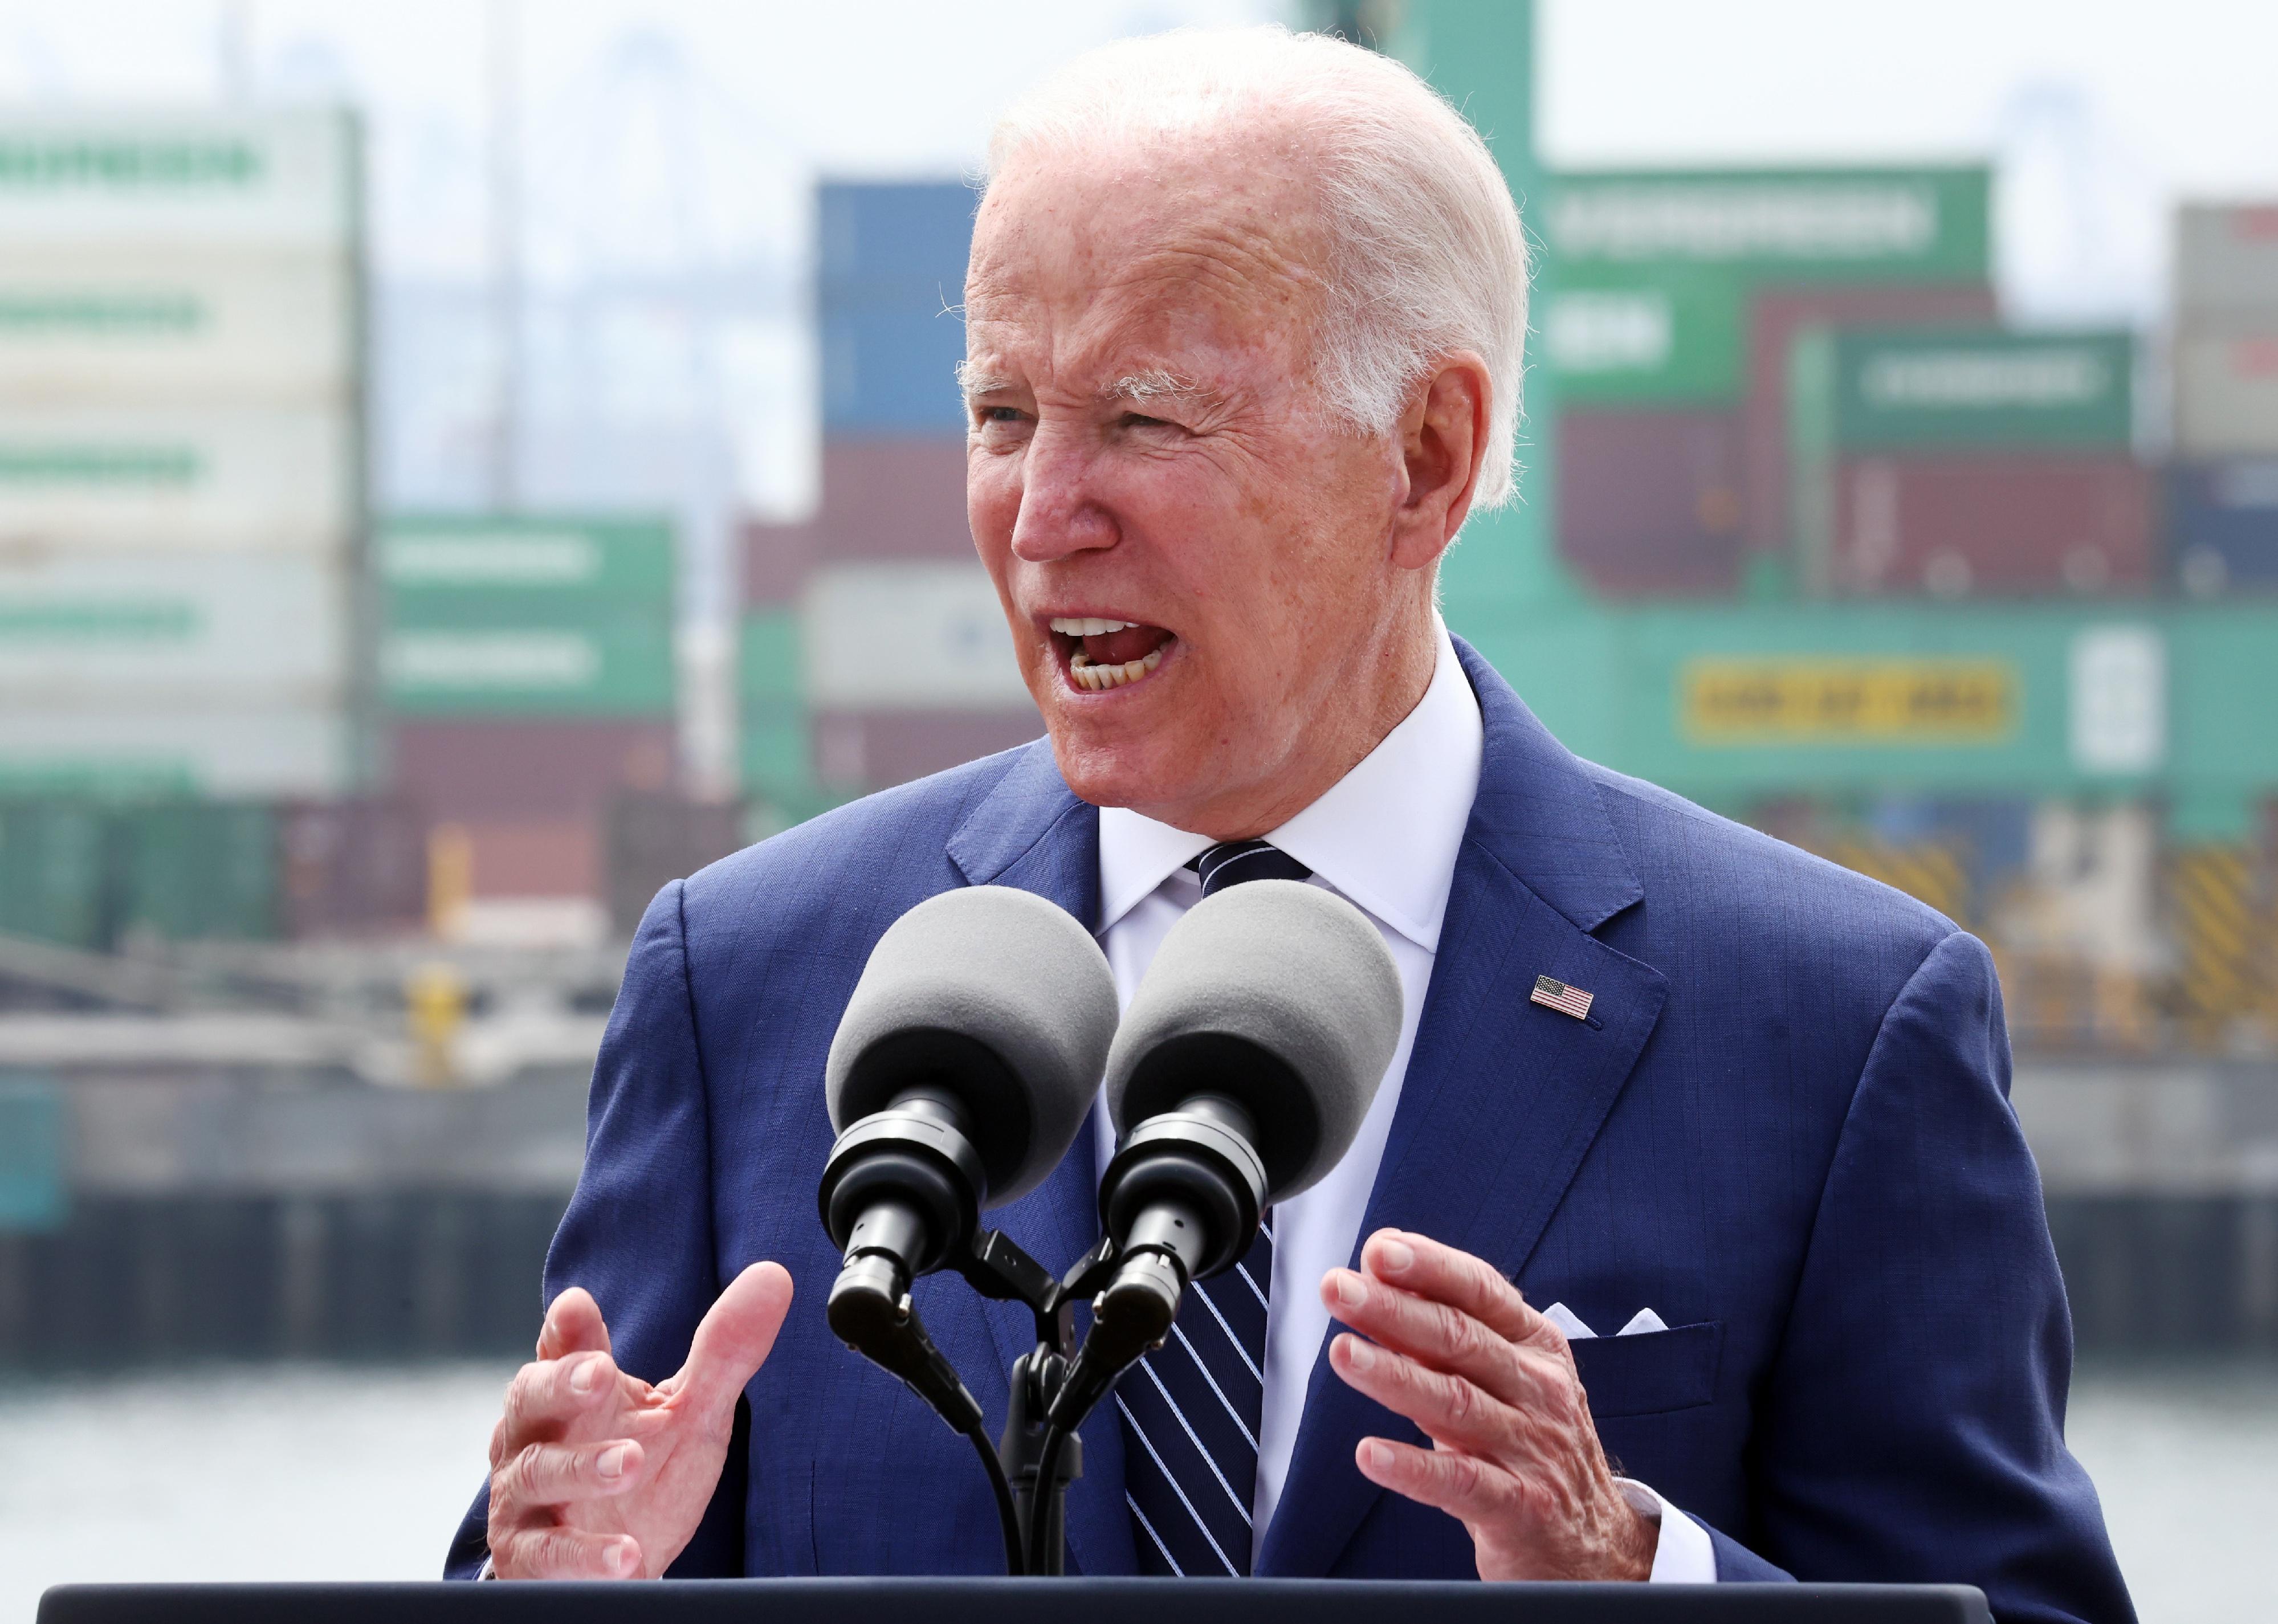 President Joe Biden delivers remarks aboard the Battleship USS Iowa Museum at the Port of Los Angeles.